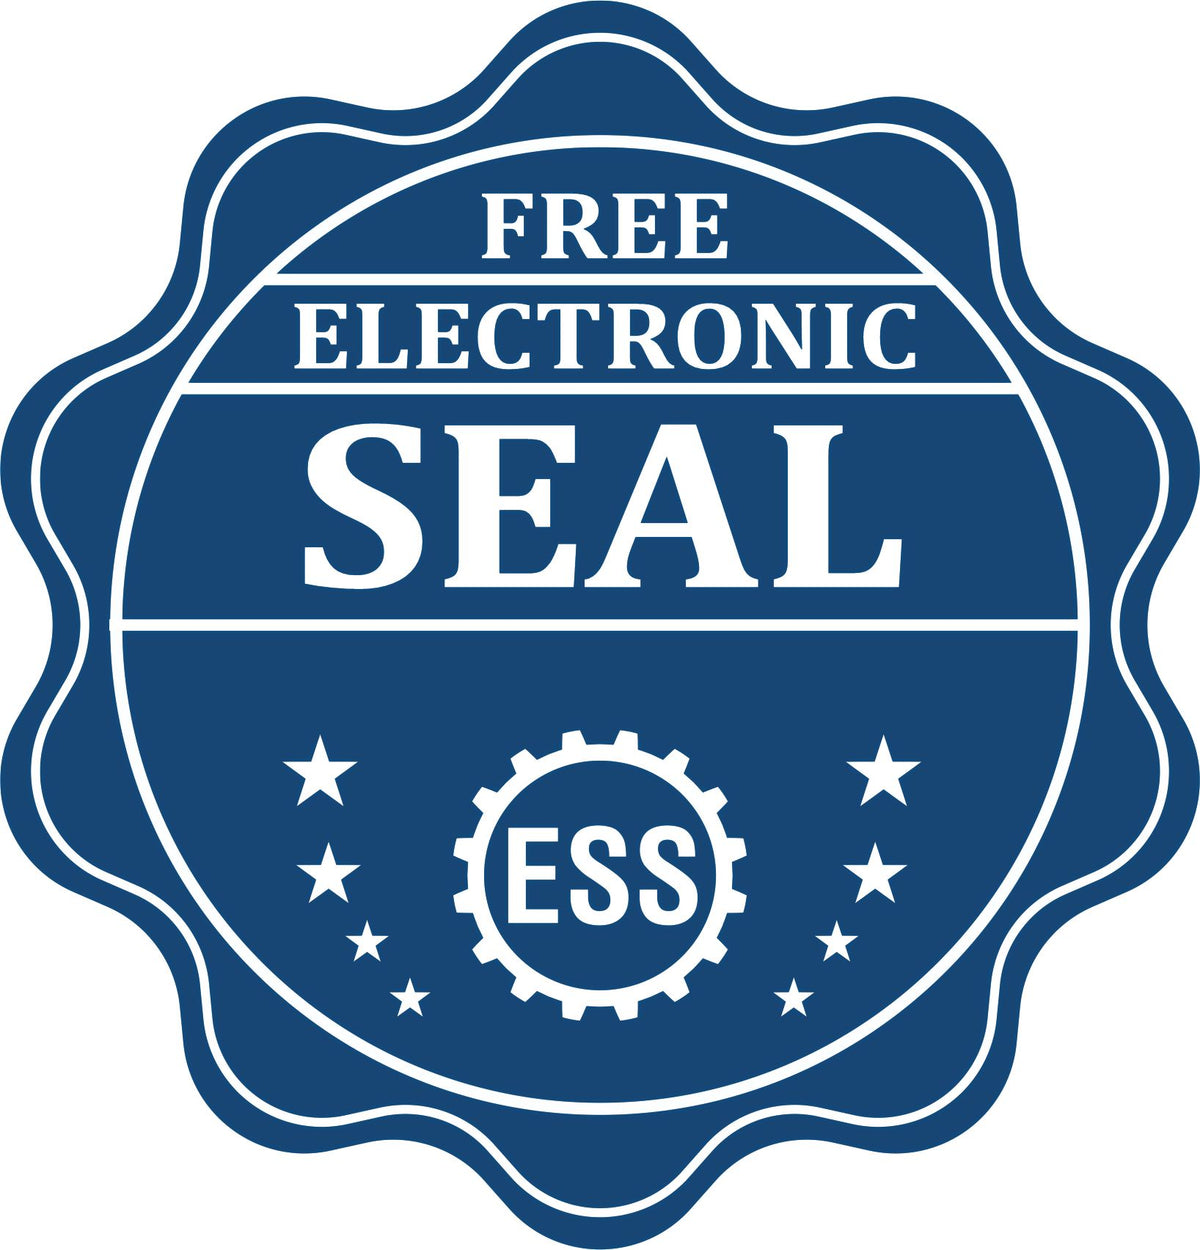 A badge showing a free electronic seal for the State of Delaware Soft Land Surveyor Embossing Seal with stars and the ESS gear on the emblem.